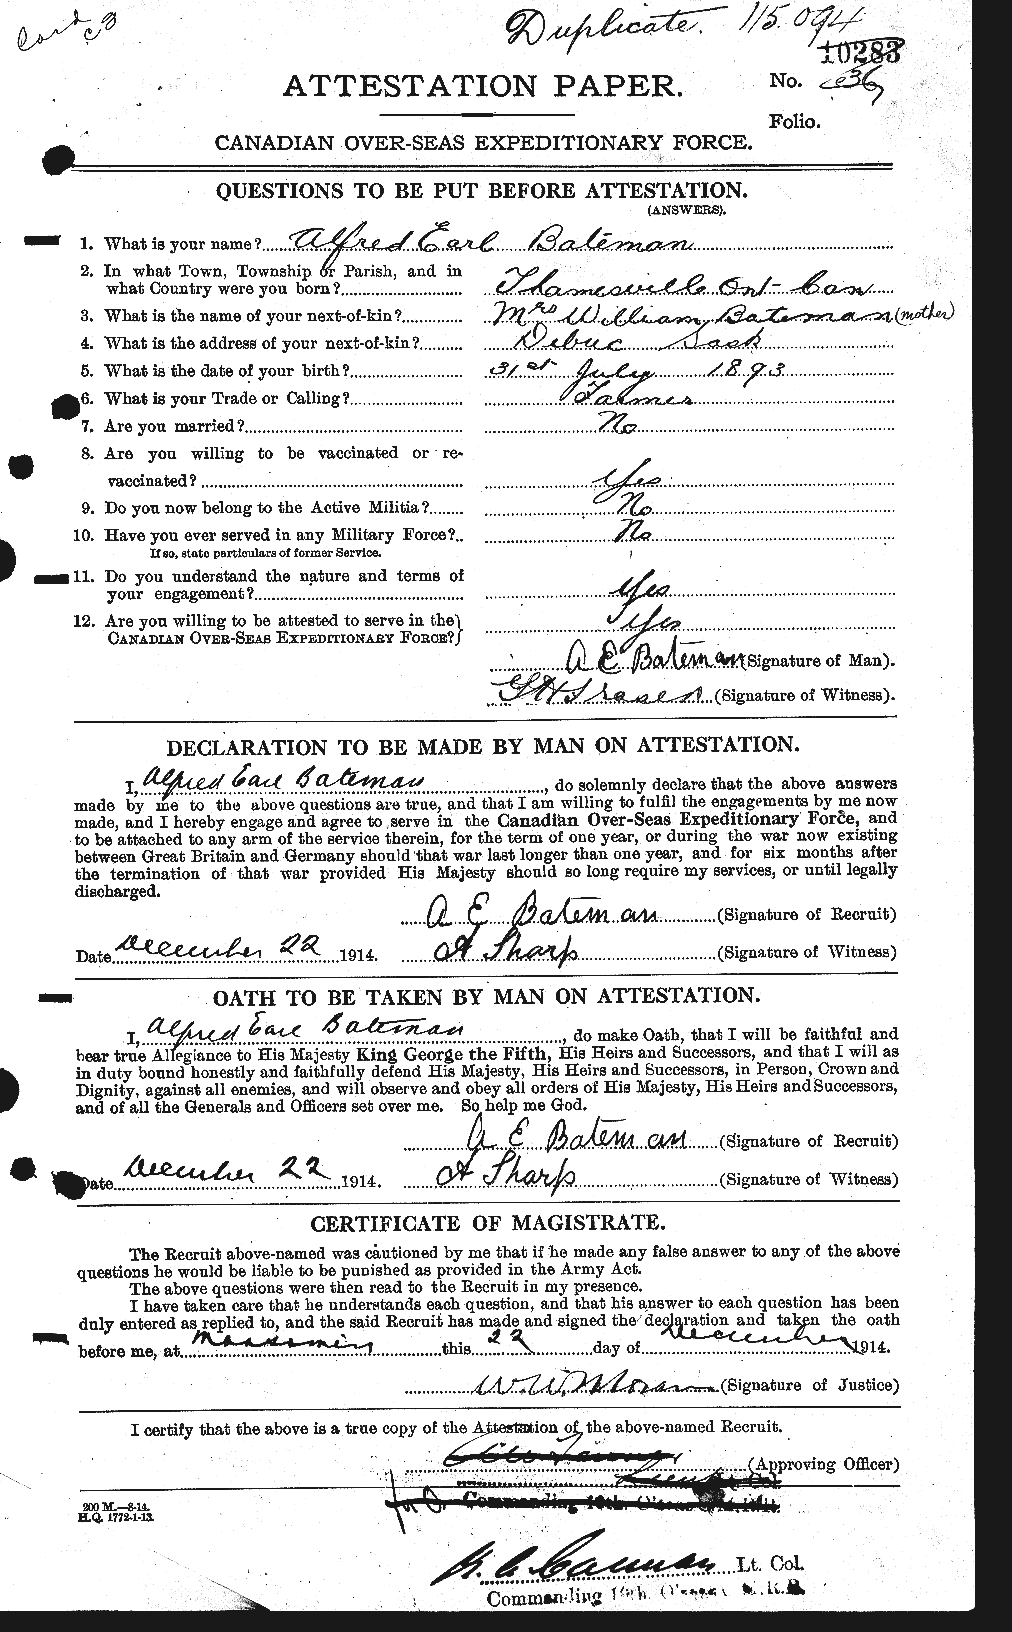 Personnel Records of the First World War - CEF 228068a